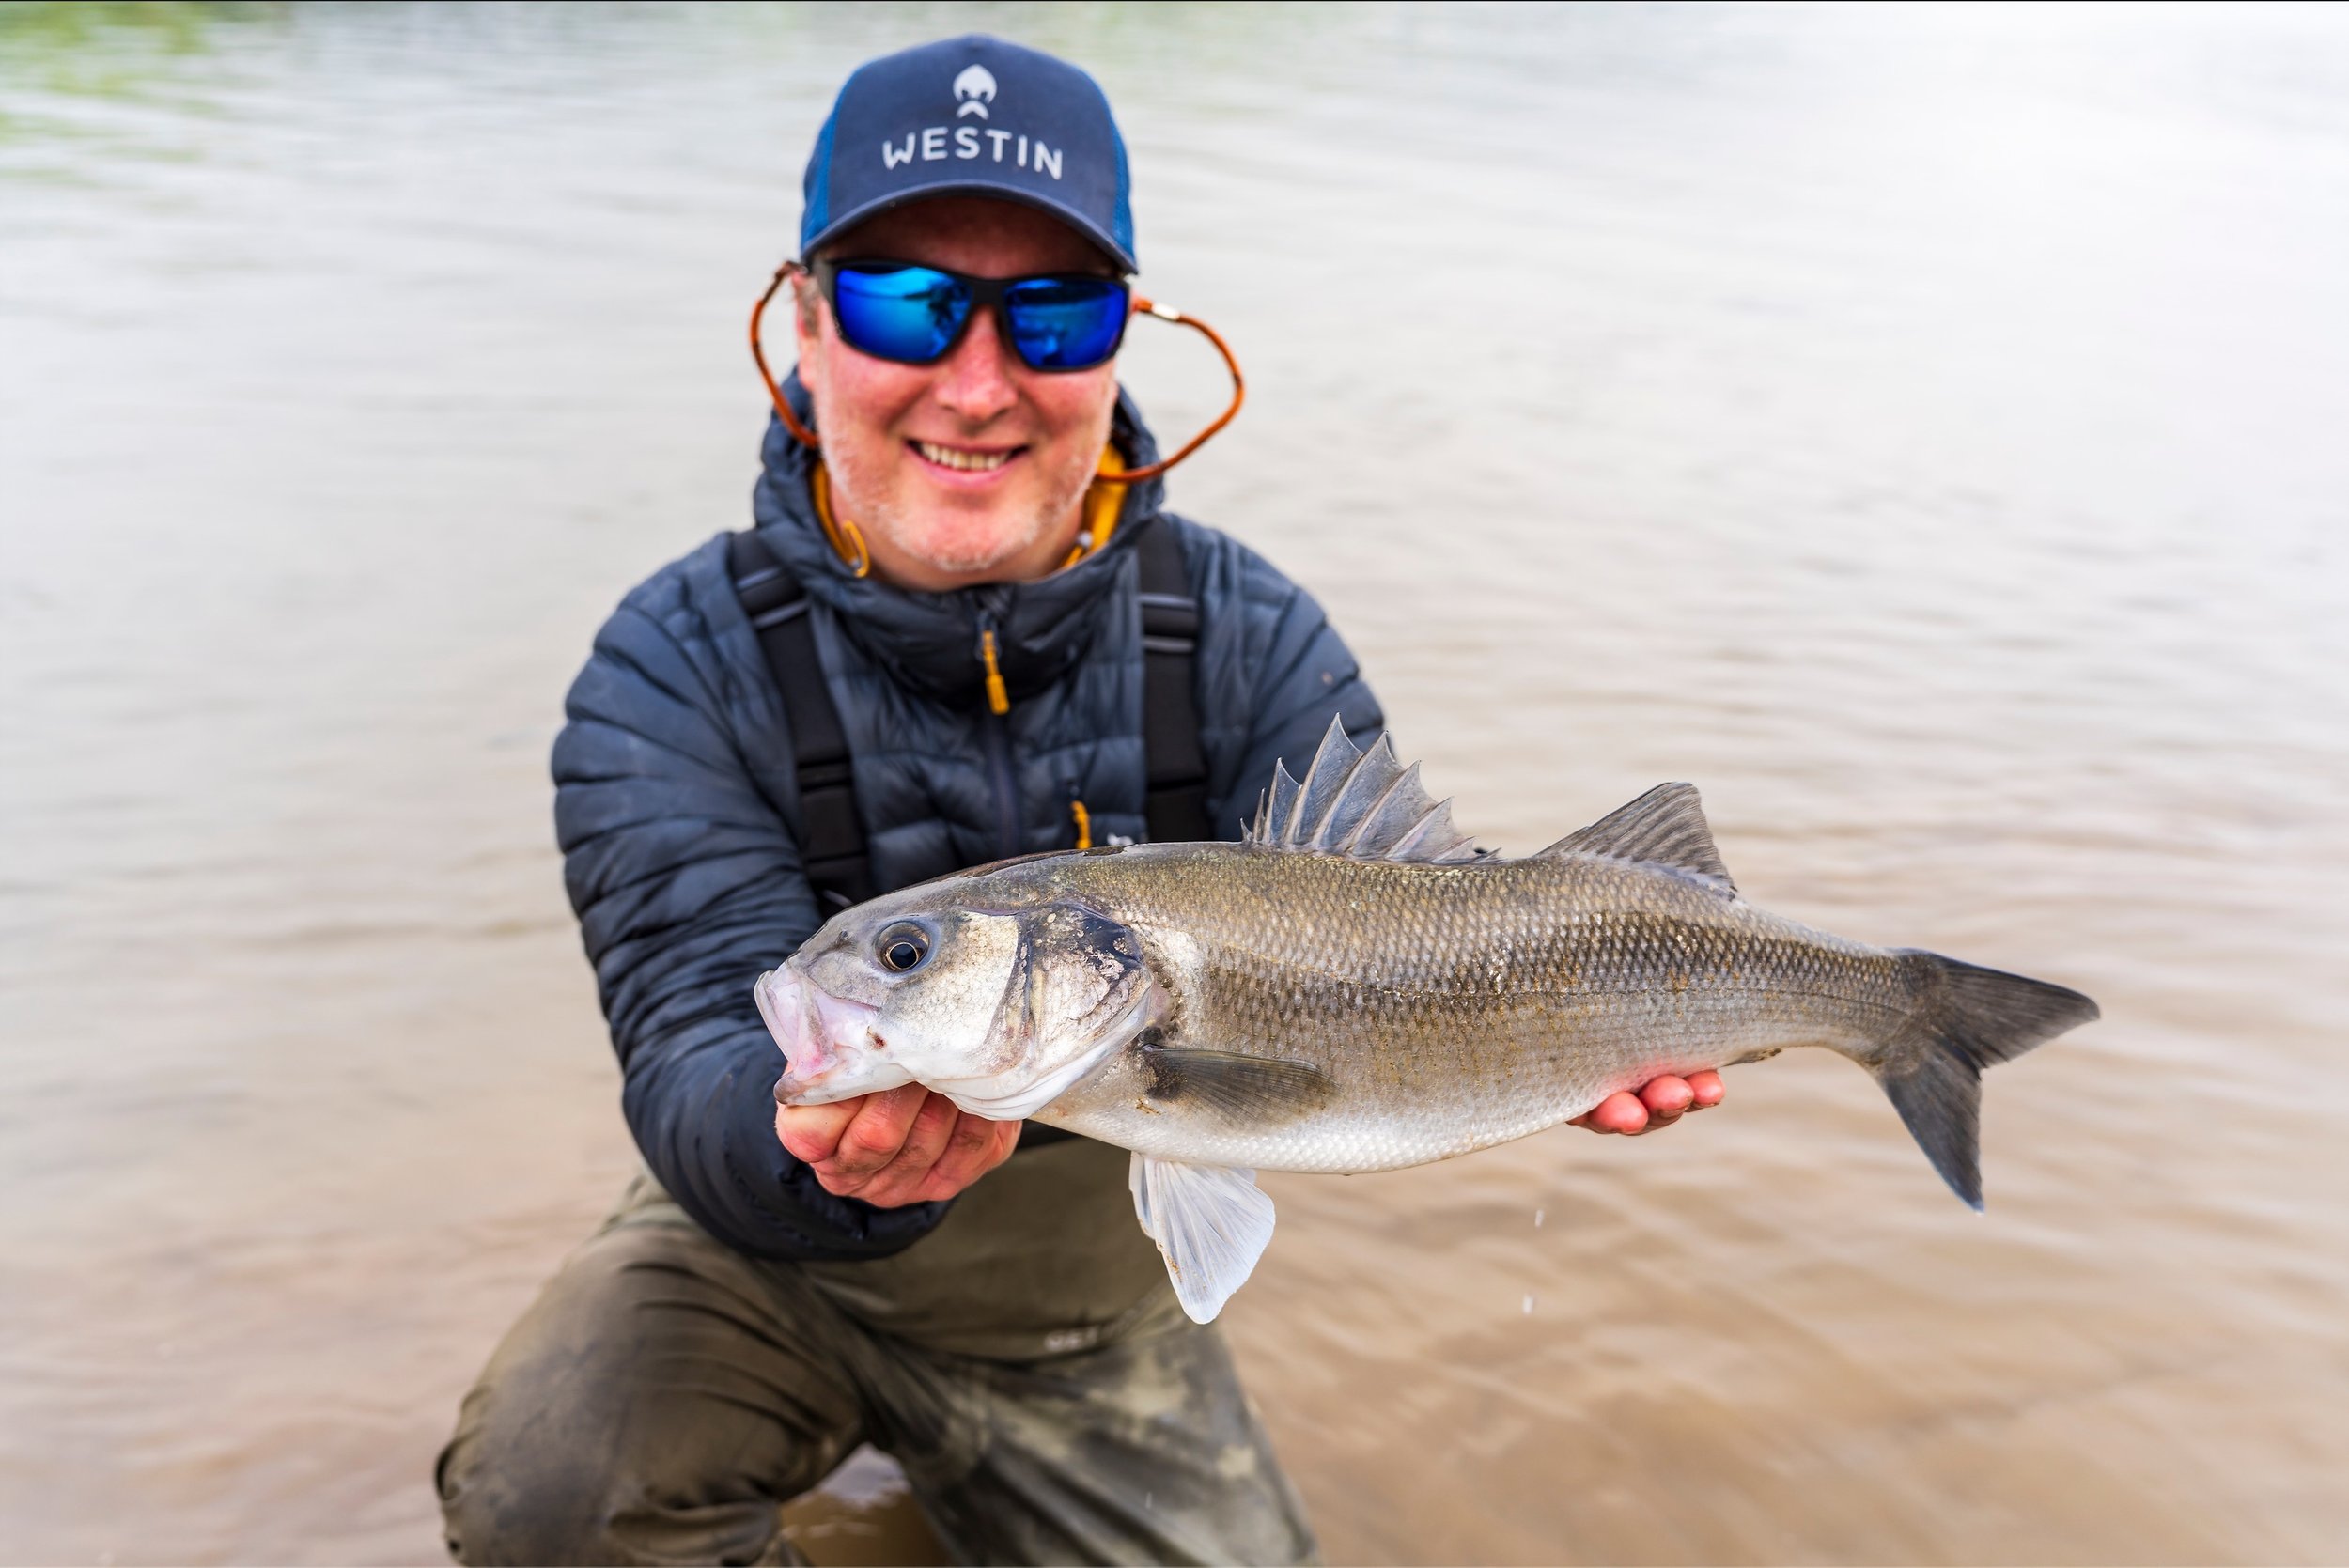 Winter bass aren't easy, so it's always extra special when you do